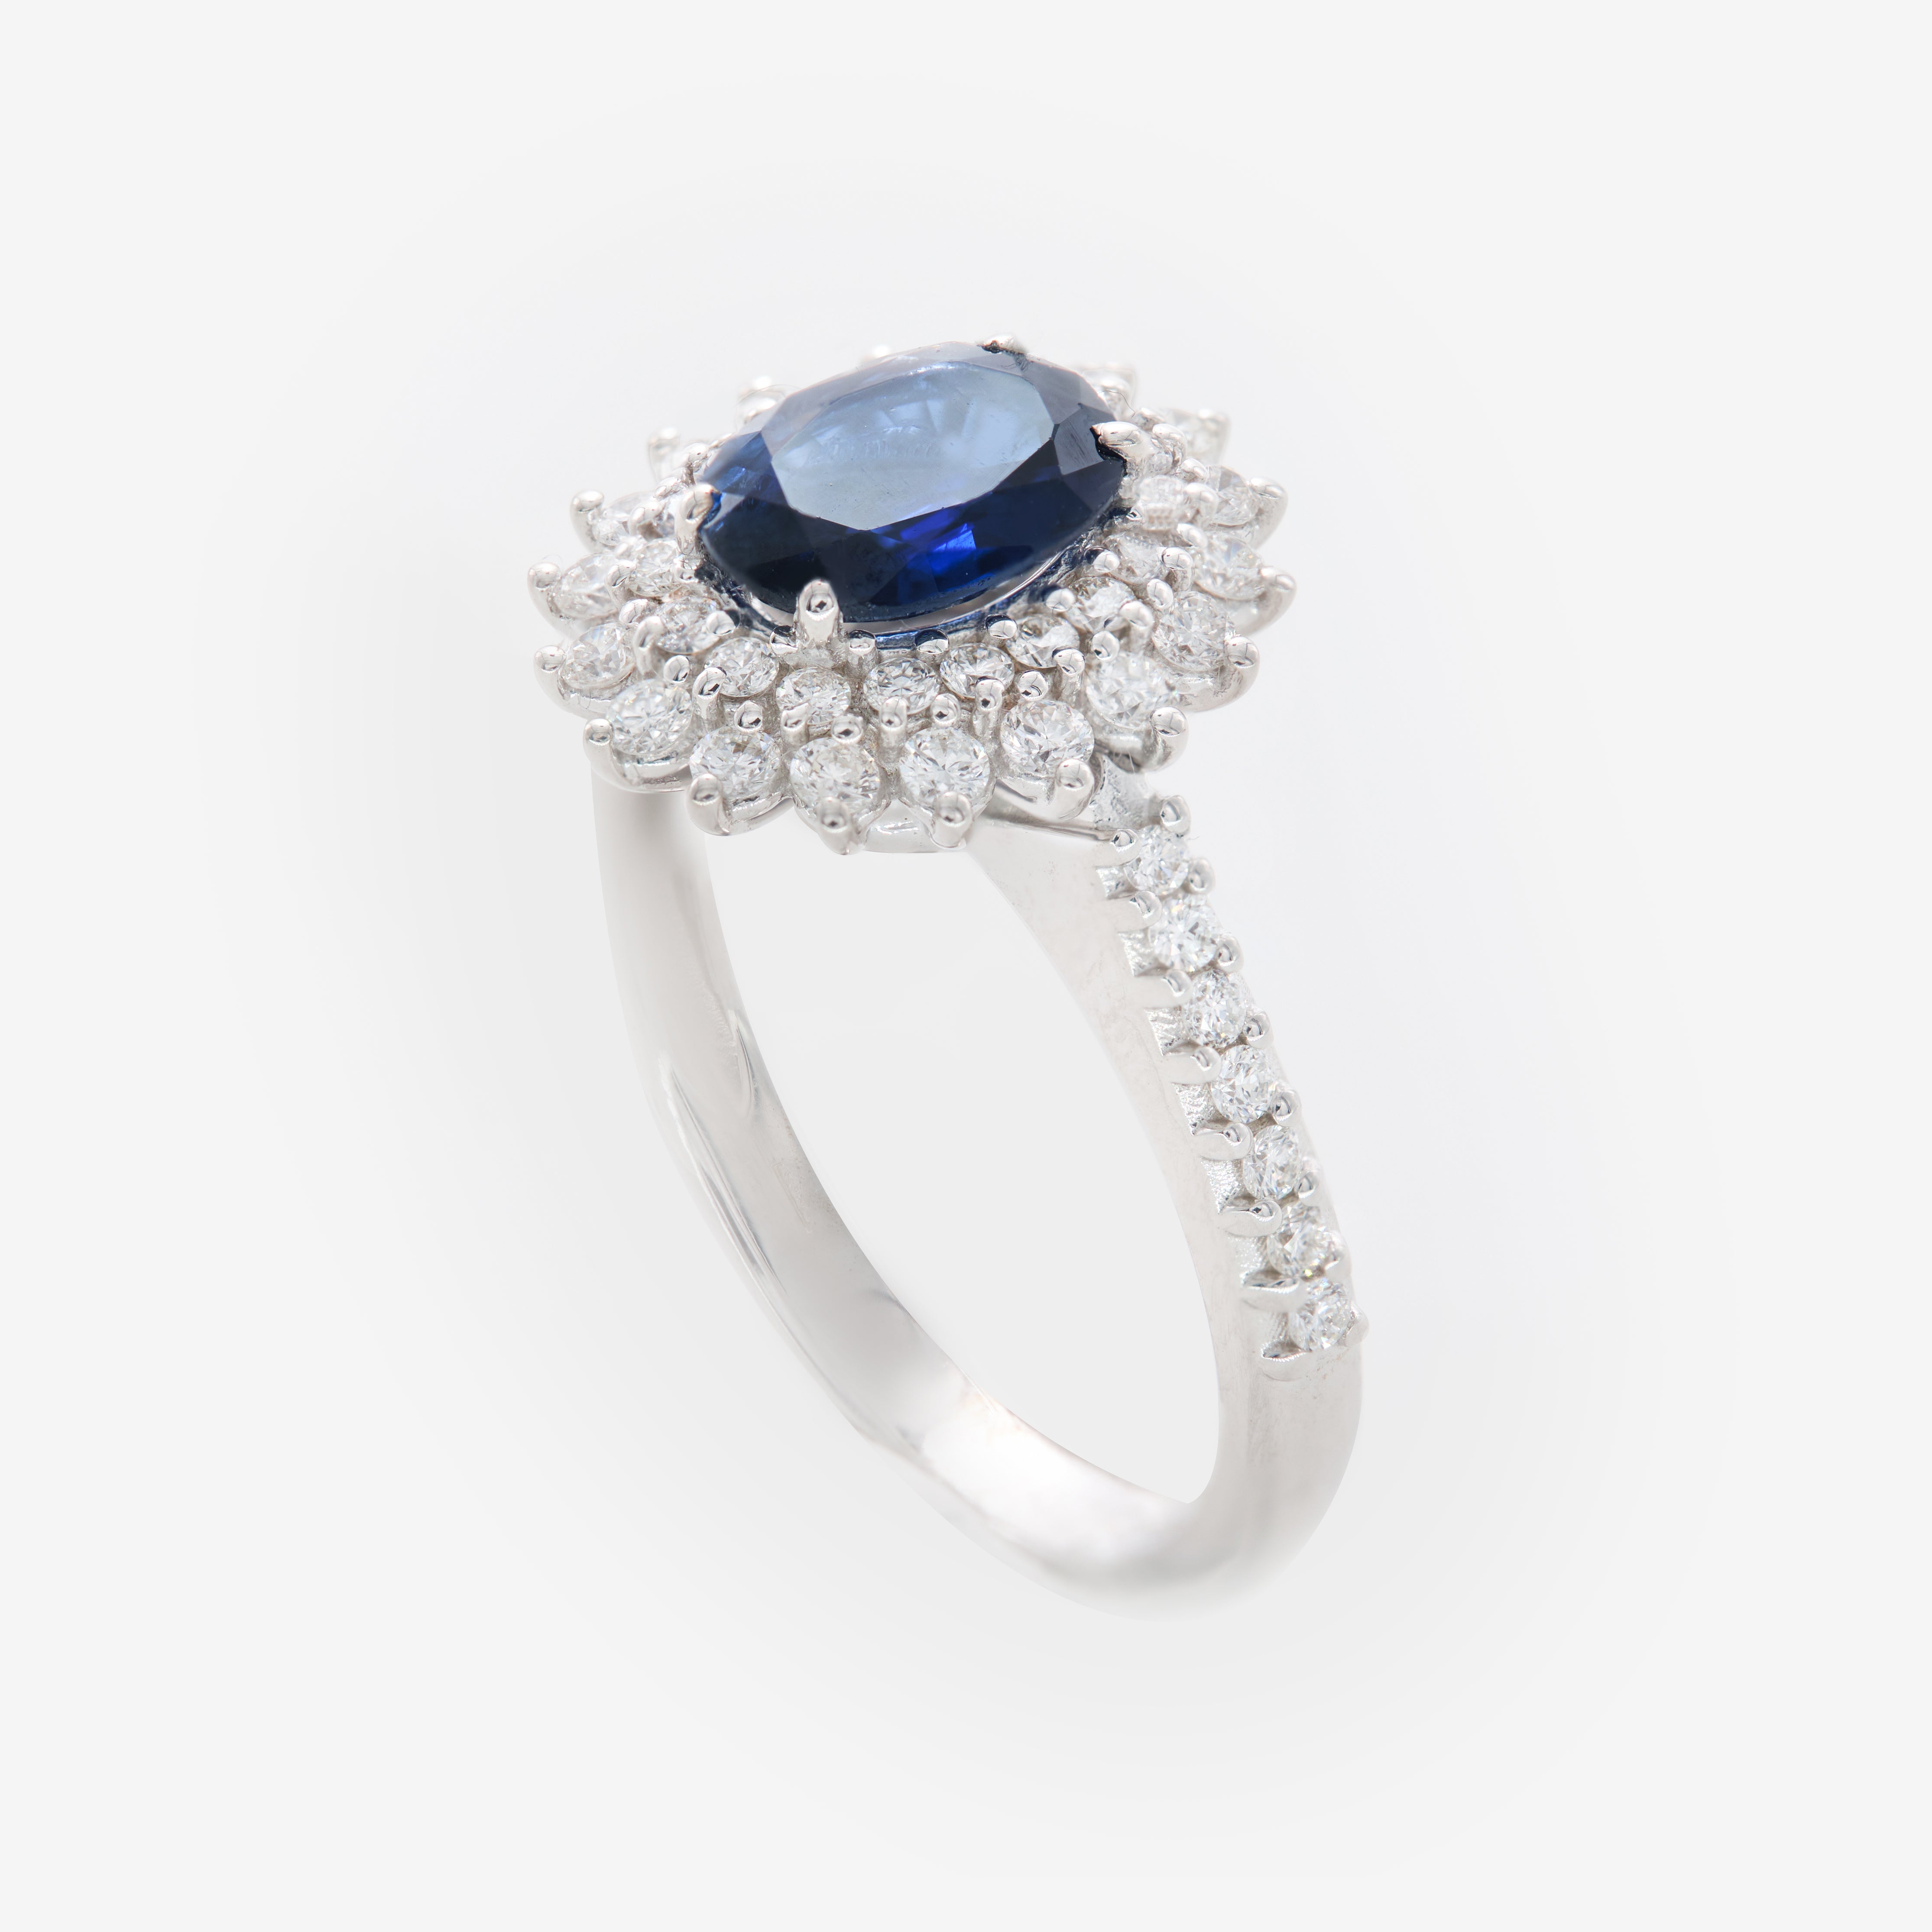 Agnes ring with sapphire and diamonds